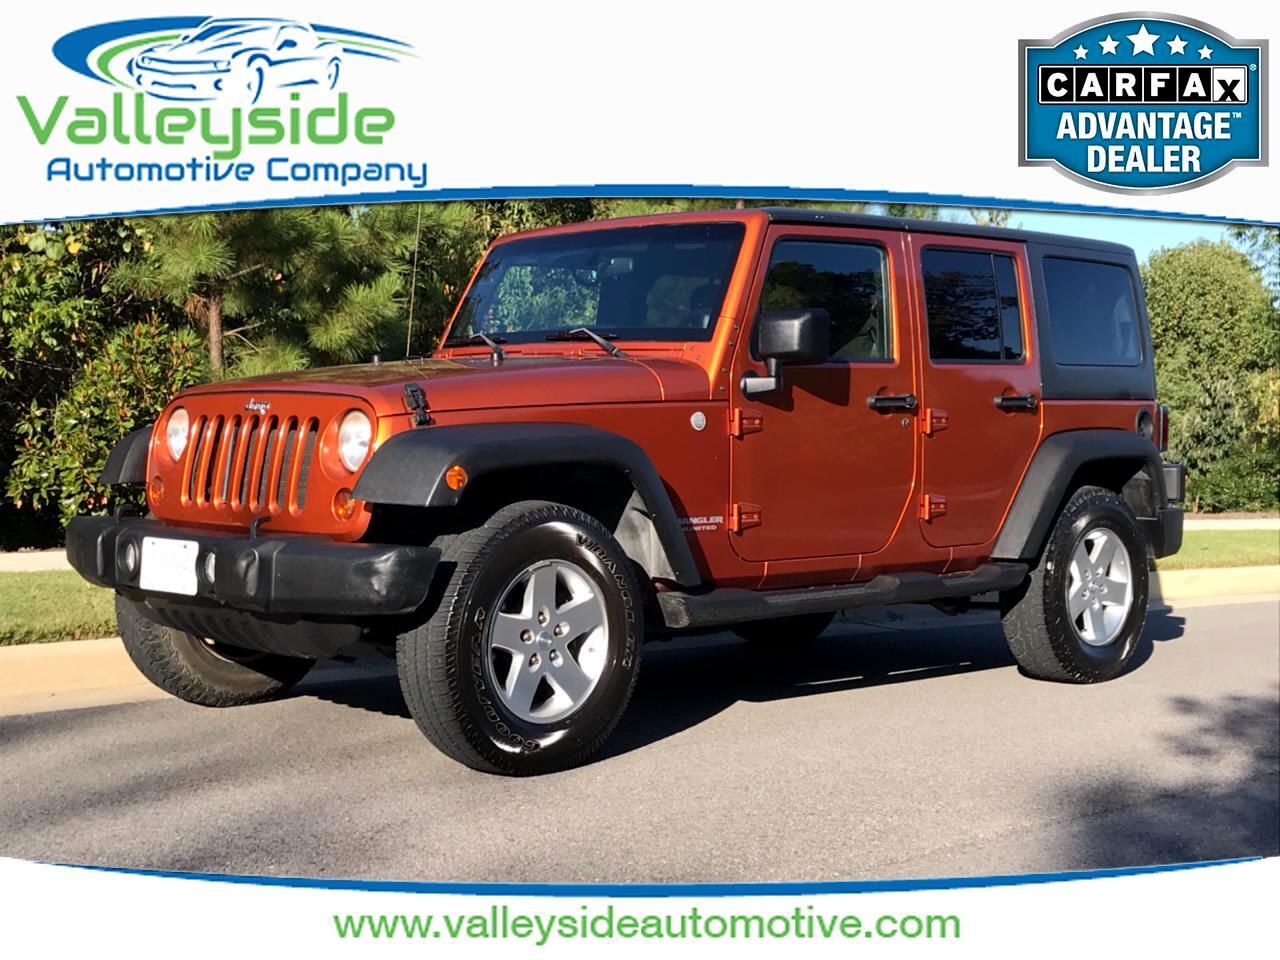 Used 2011 Jeep Wrangler Unlimited Sport 4wd For Sale In